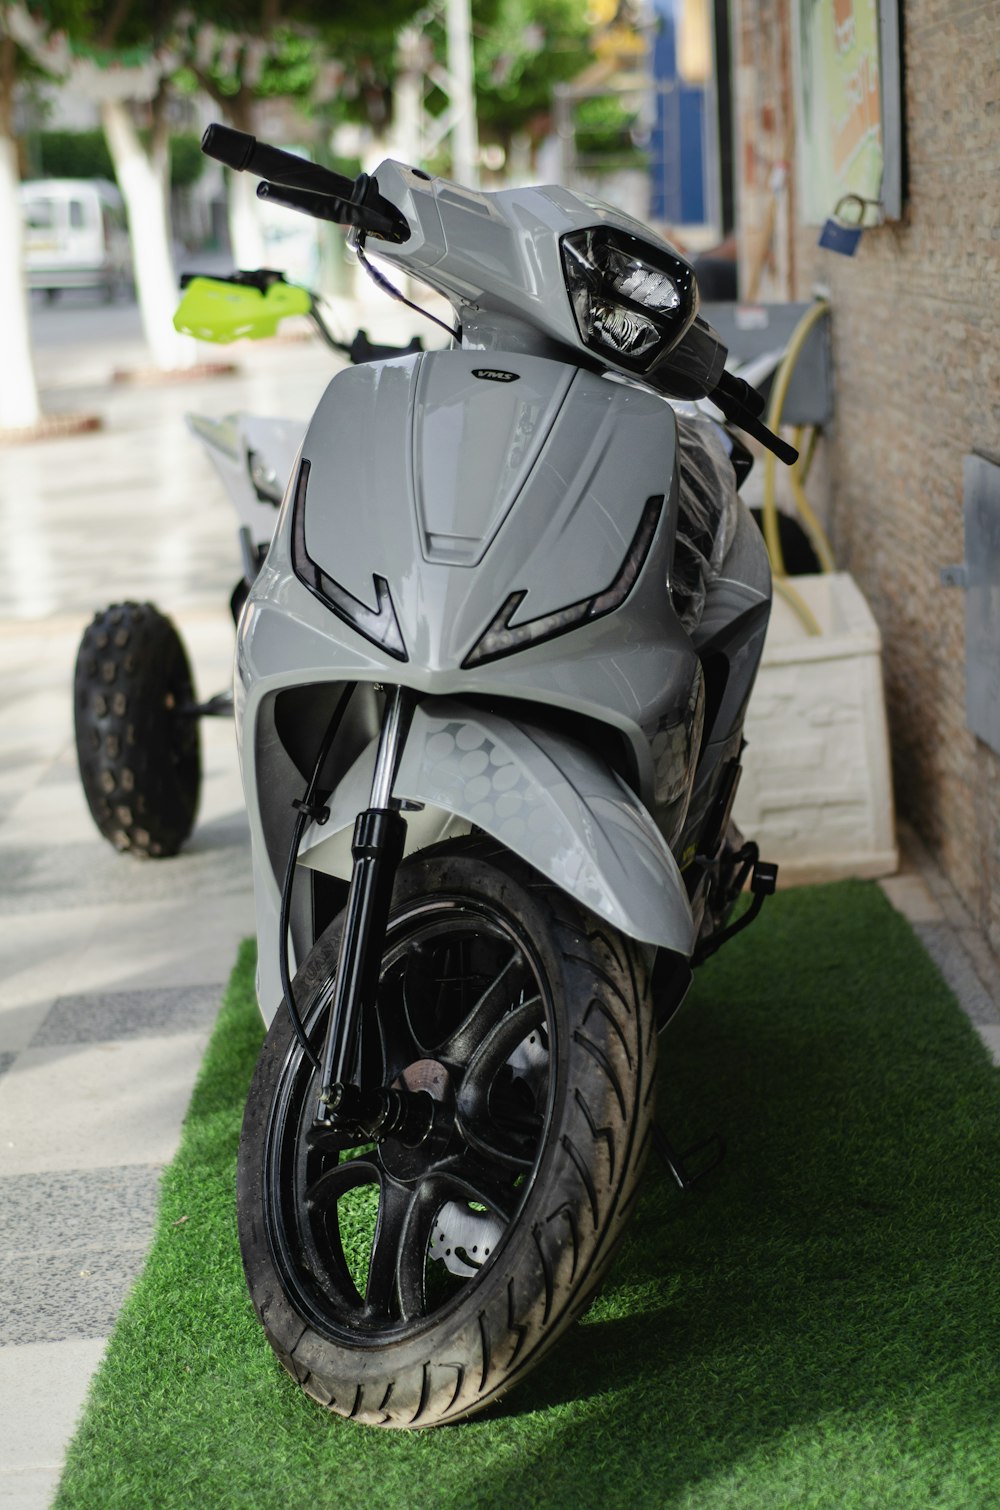 a motorcycle is parked on the grass near a building